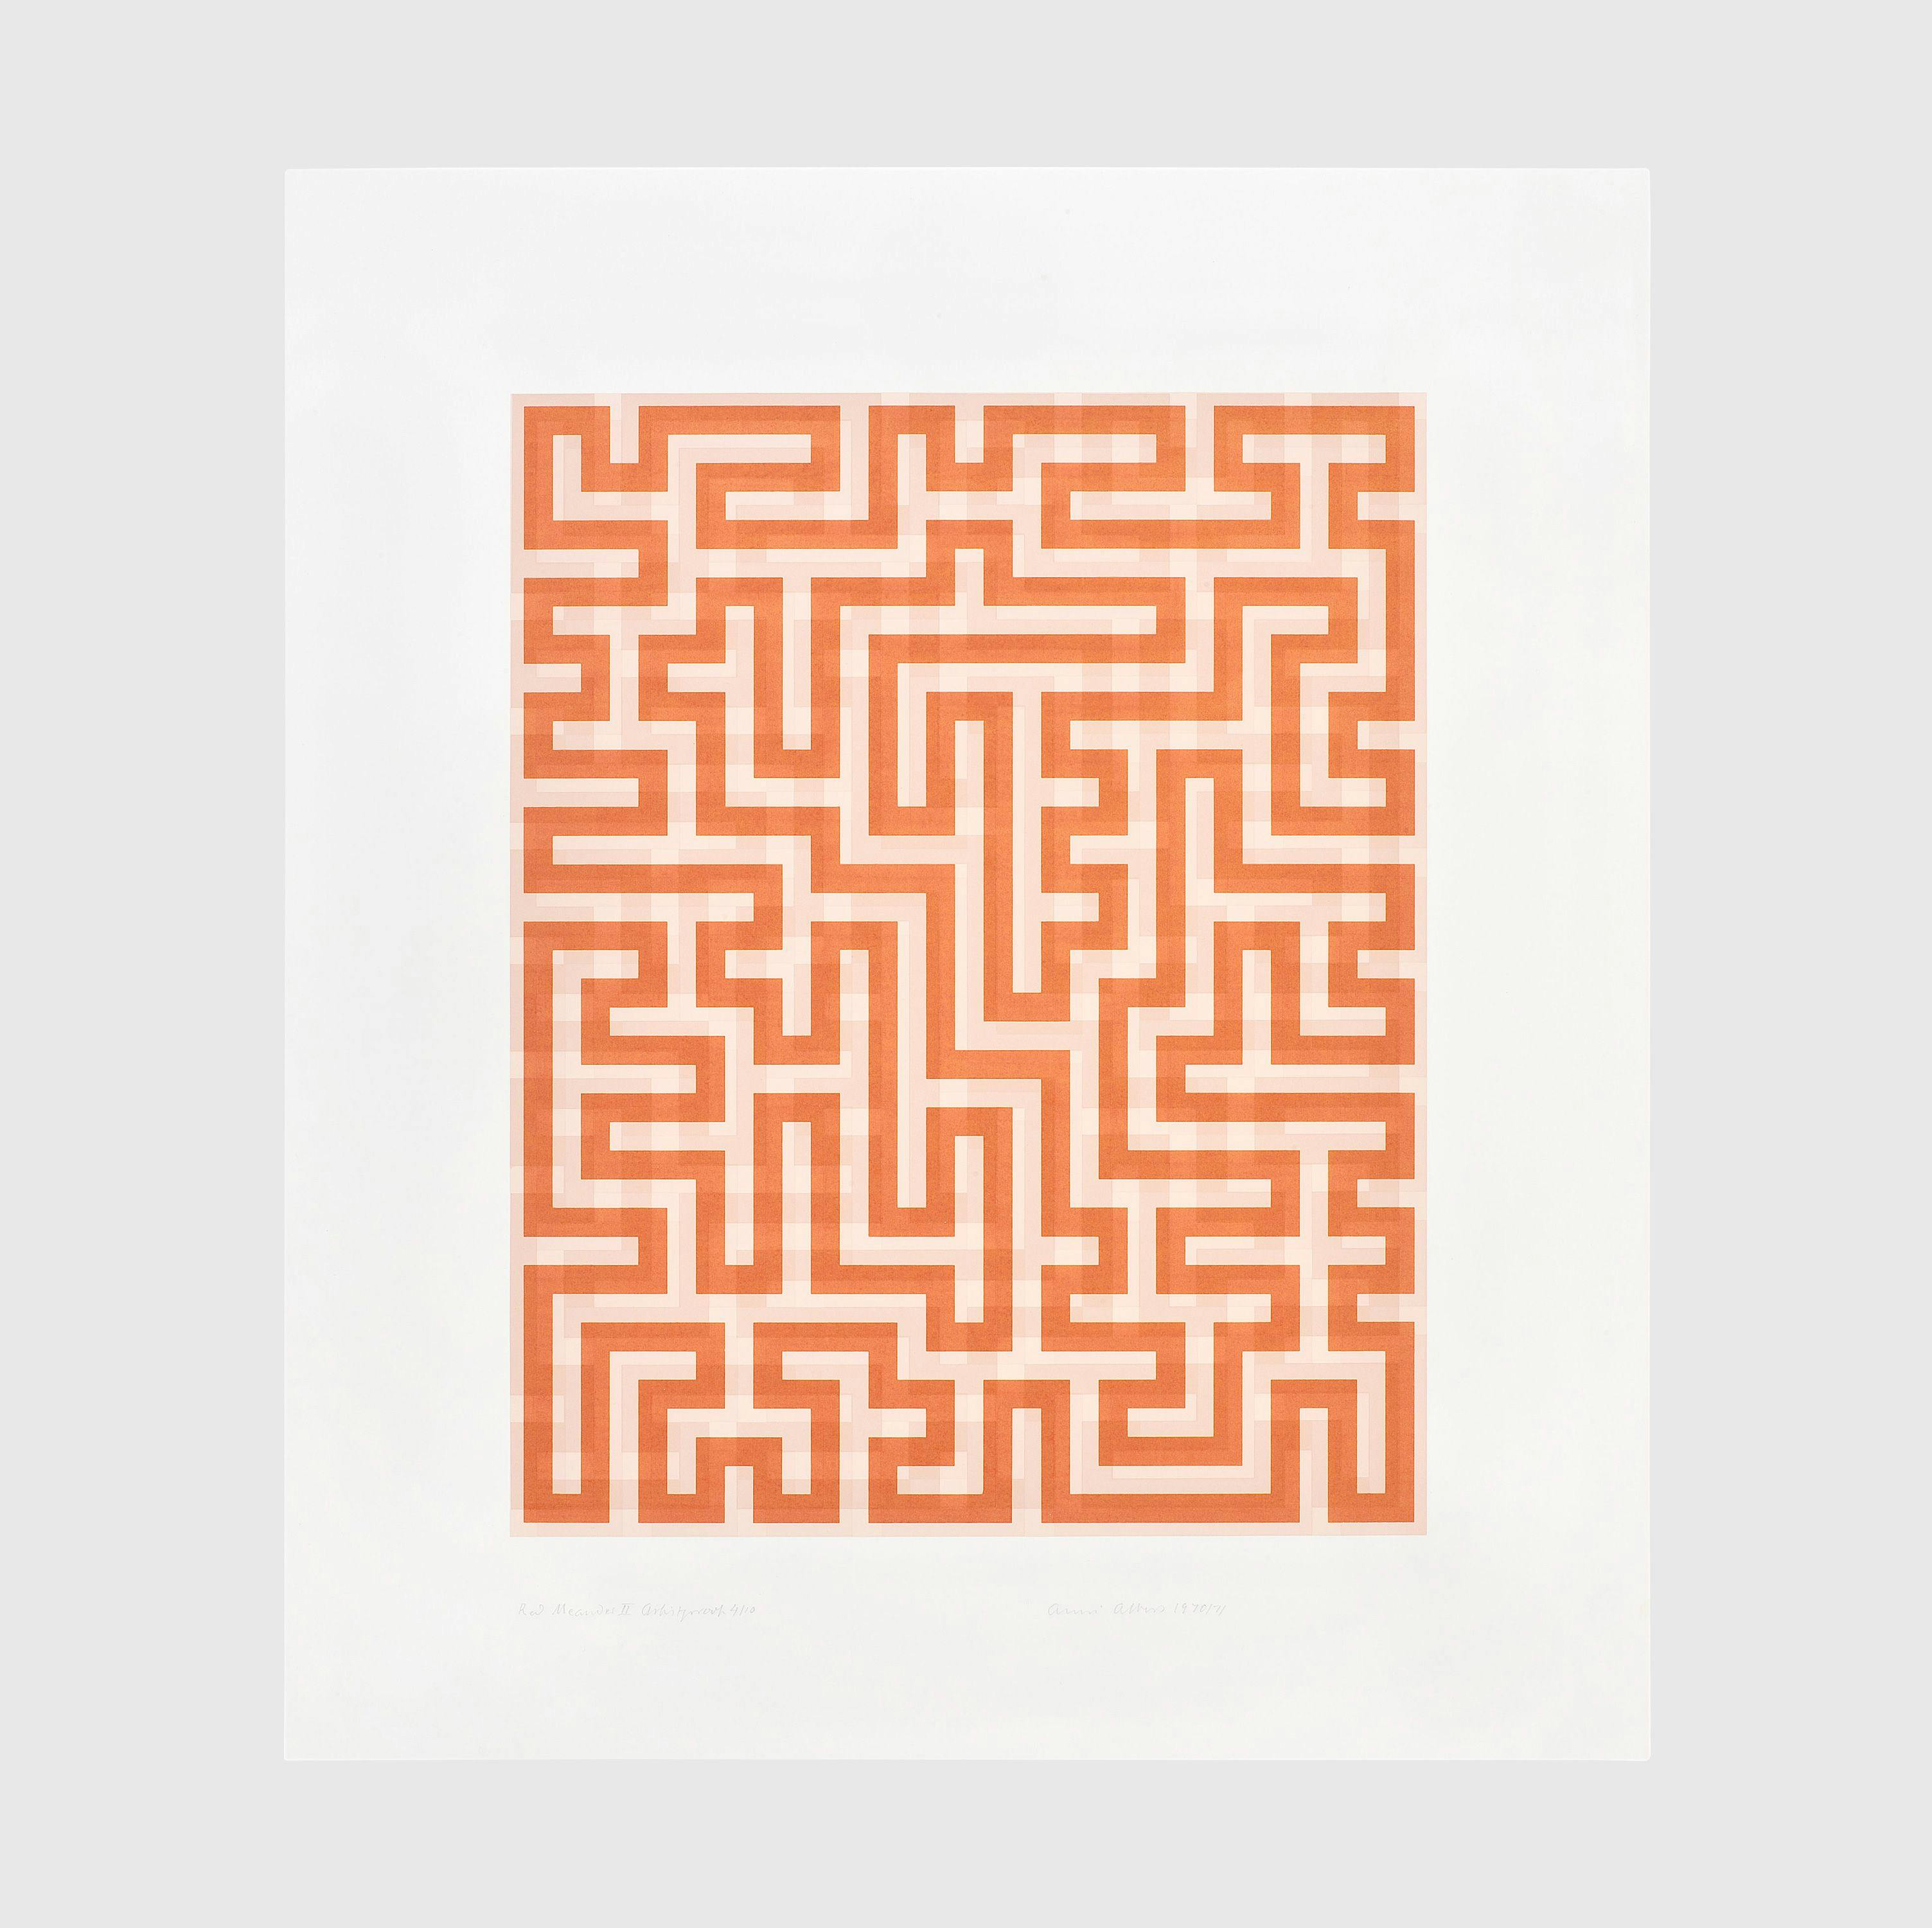 A print by Anni Albers, titled Red Meander II, 1970 to 1971.